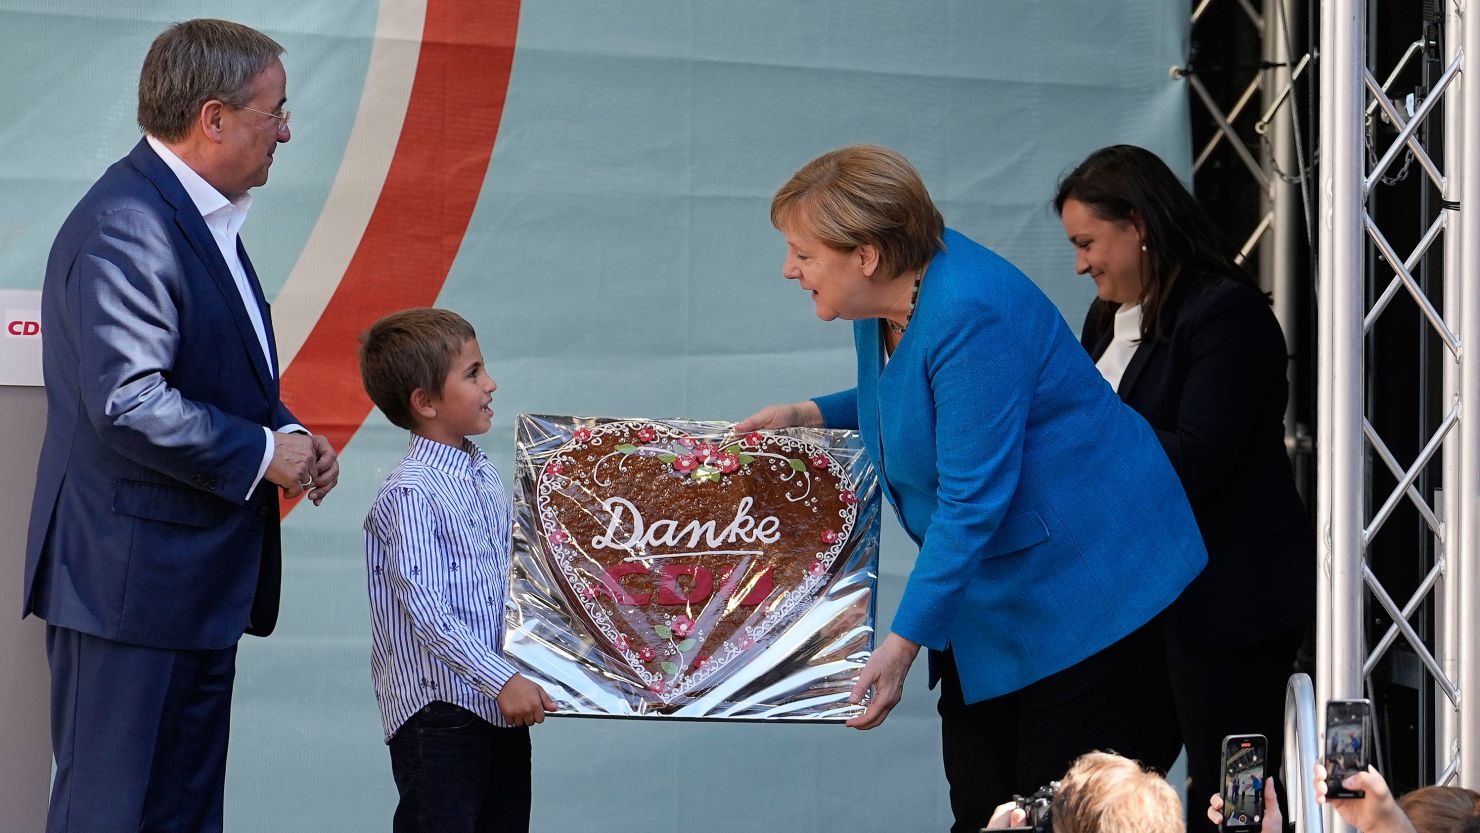 Chancellor Angela Merkel is given a traditional gingerbread reading "Thanks CDU" beside Armin Laschet, top candidate for the upcoming election, left, at their party's final campaign event in Aachen on Saturday.